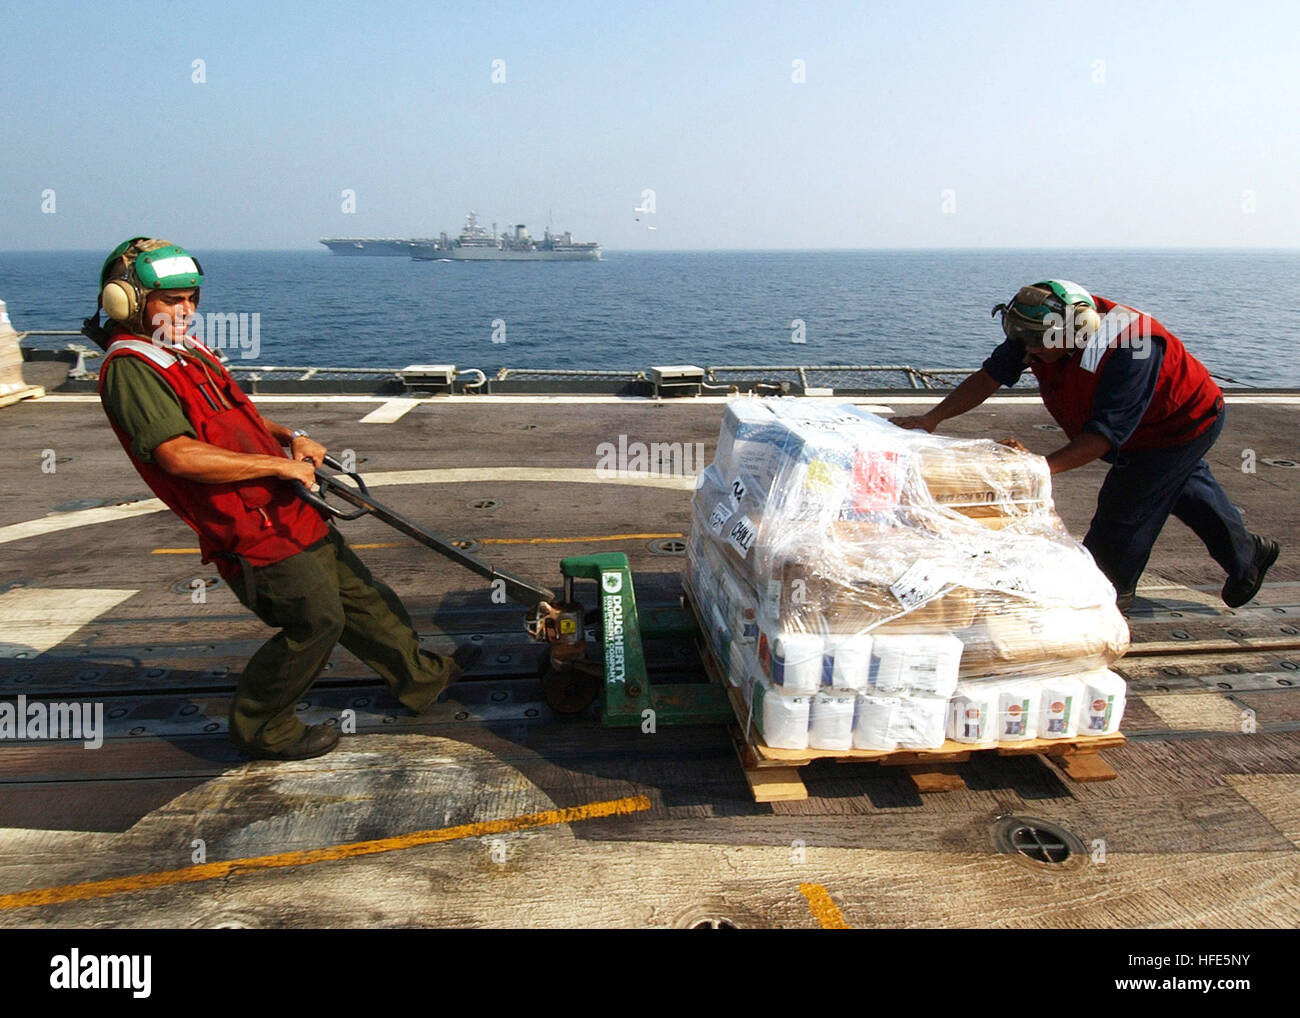 041112-N-4374S-007 Arabian Gulf (Nov. 12, 2004) - Sailors assigned to the ÒProud WarriorsÓ of Helicopter Anti-Submarine Squadron Light Four Two (HSL-42), move a pallet of stores across the flight deck of the guided missile cruiser USS Vicksburg (CG 69), during a vertical replenishment (VERTREP) with the Military Sealift Command (MSC) combat stores ship USNS Saturn (T-AFS 10).  Vicksburg is part of USS John F. Kennedy (CV 67) Carrier Strike Group currently on a regularly scheduled deployment in support of Operation Iraqi Freedom (OIF). U.S. Navy photo by PhotographerÕs Mate 2nd Class Michael Sa Stock Photo